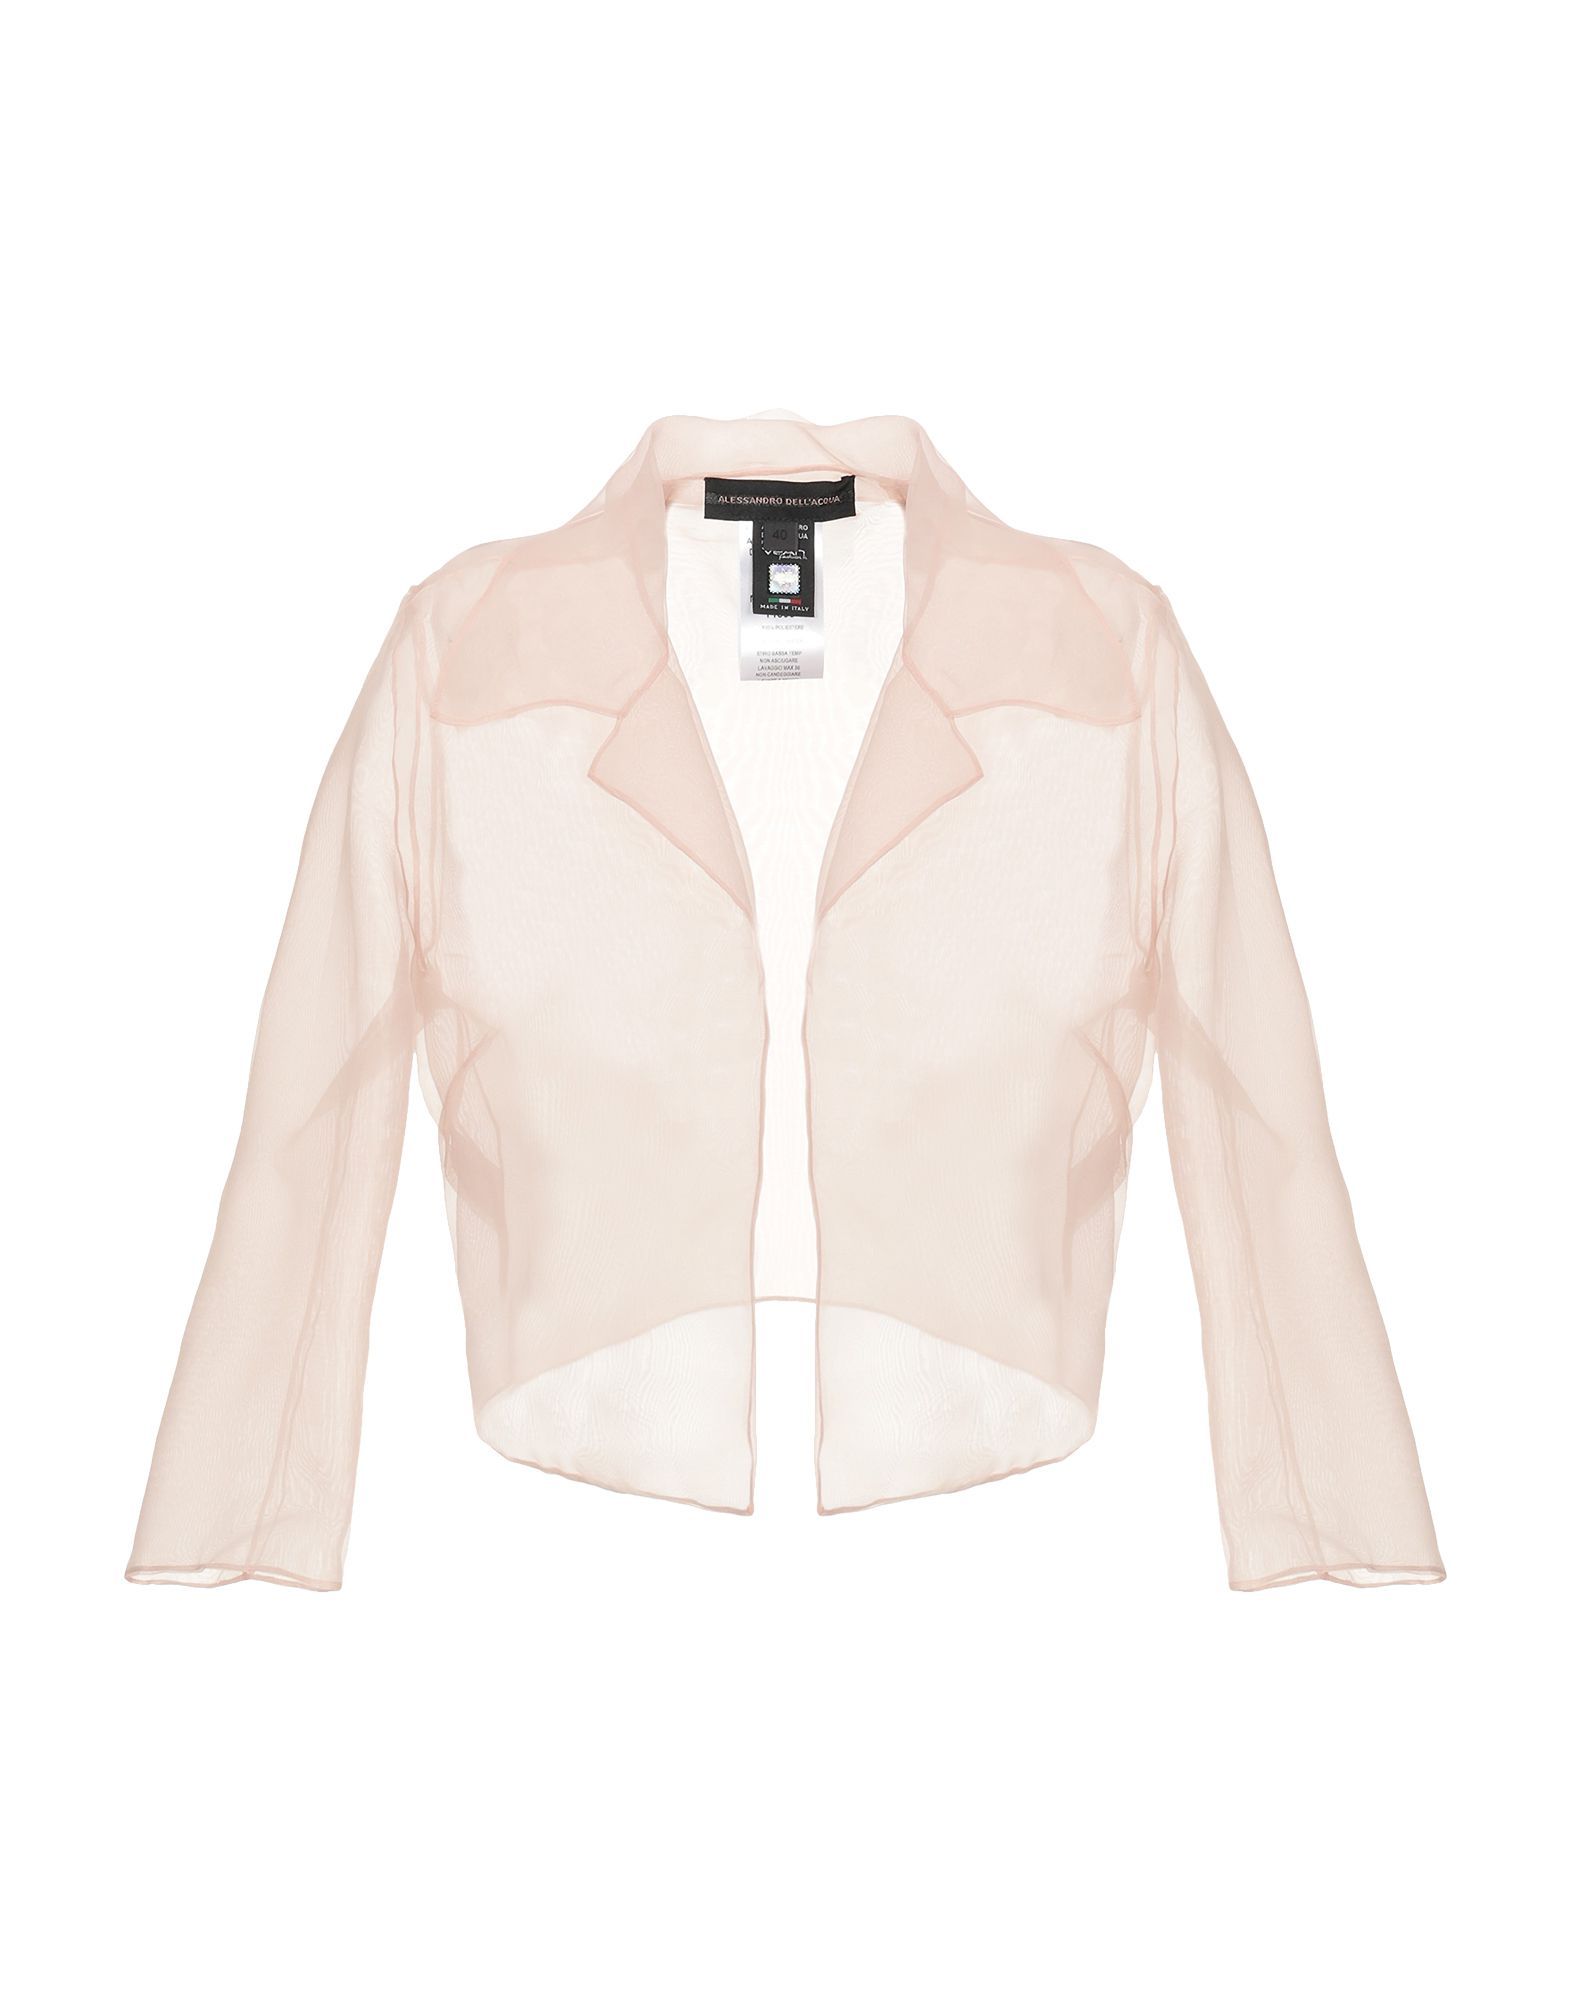 organza, no appliqués, basic solid colour, no pockets, deep neckline, single-breasted , 3/4 length sleeves, unlined, single-breasted jacket